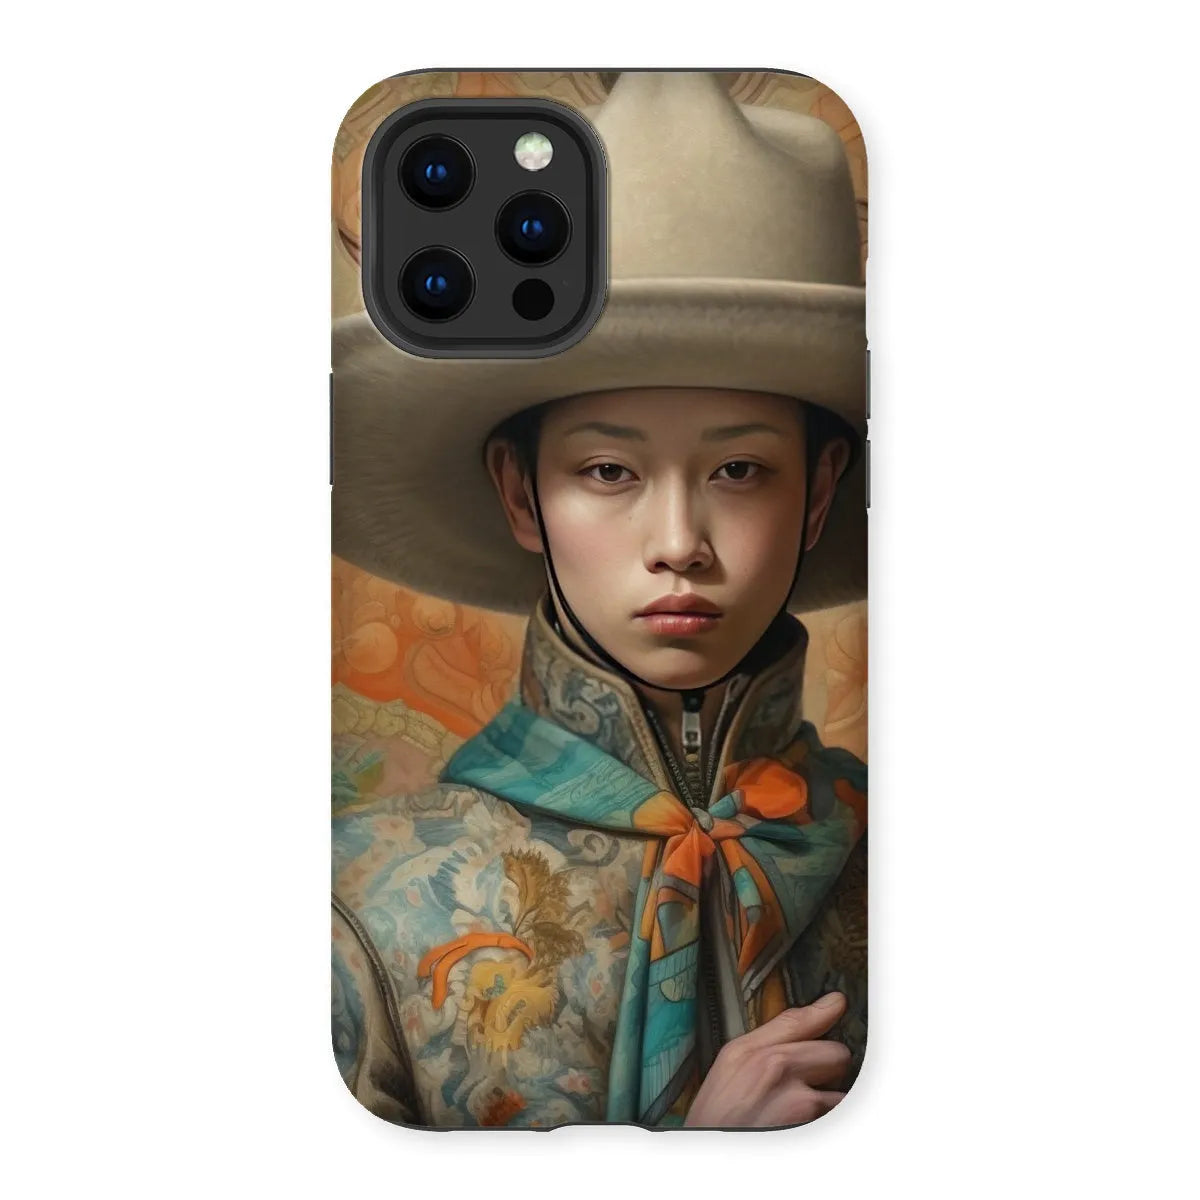 Xiang - Gaysian Chinese Cowboy Aesthetic Art Phone Case - Iphone 12 Pro Max / Matte - Mobile Phone Cases - Aesthetic Art